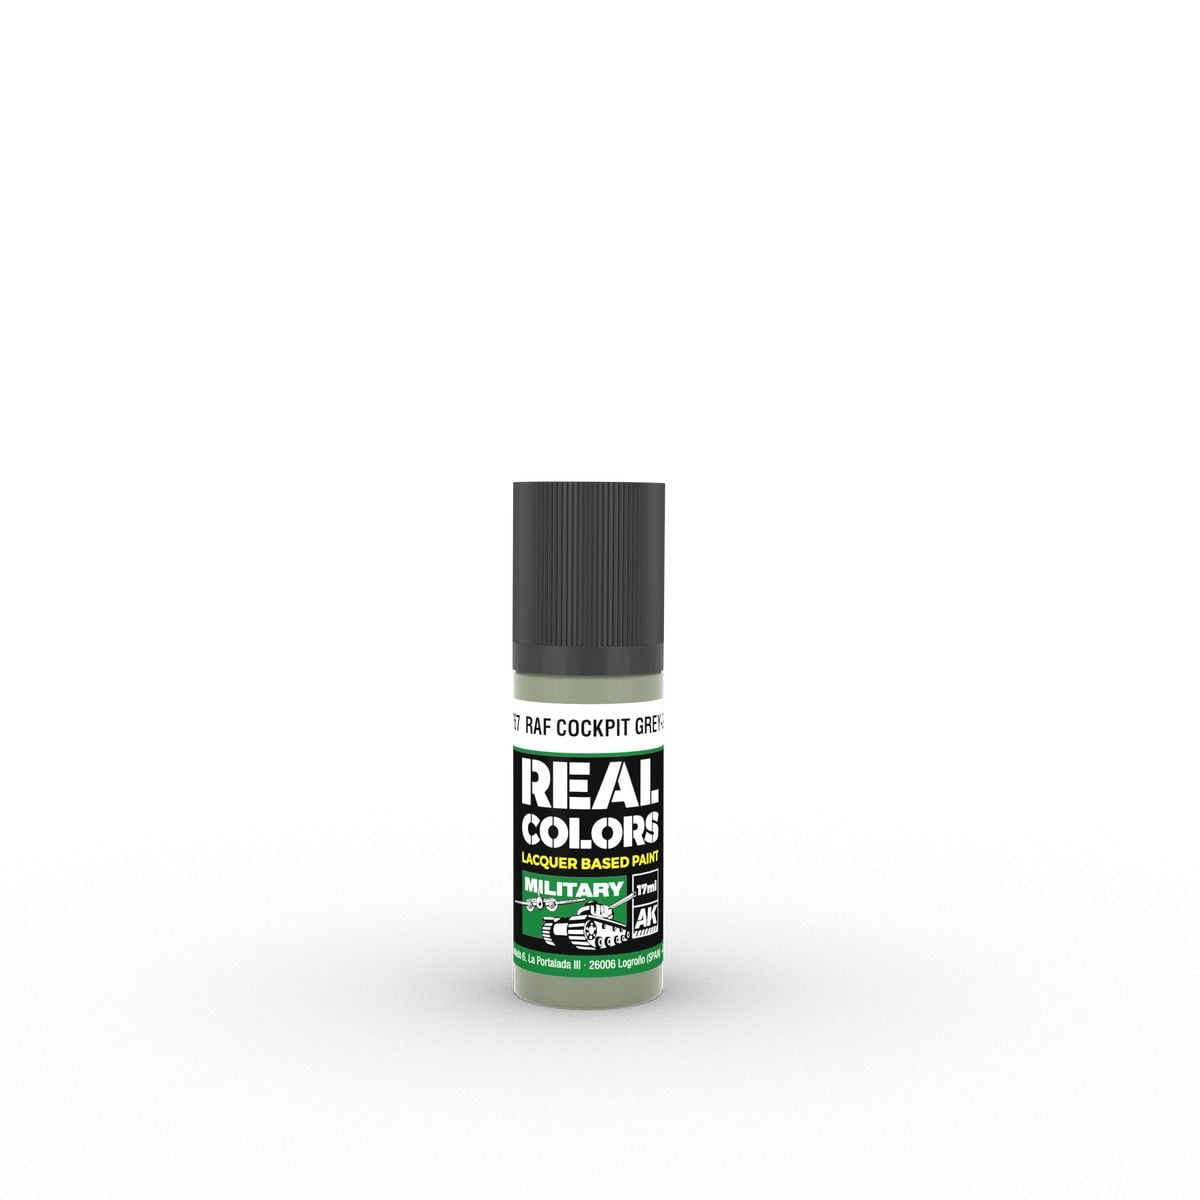 Real Colors Military: RAF Cockpit Grey-Green 17ml